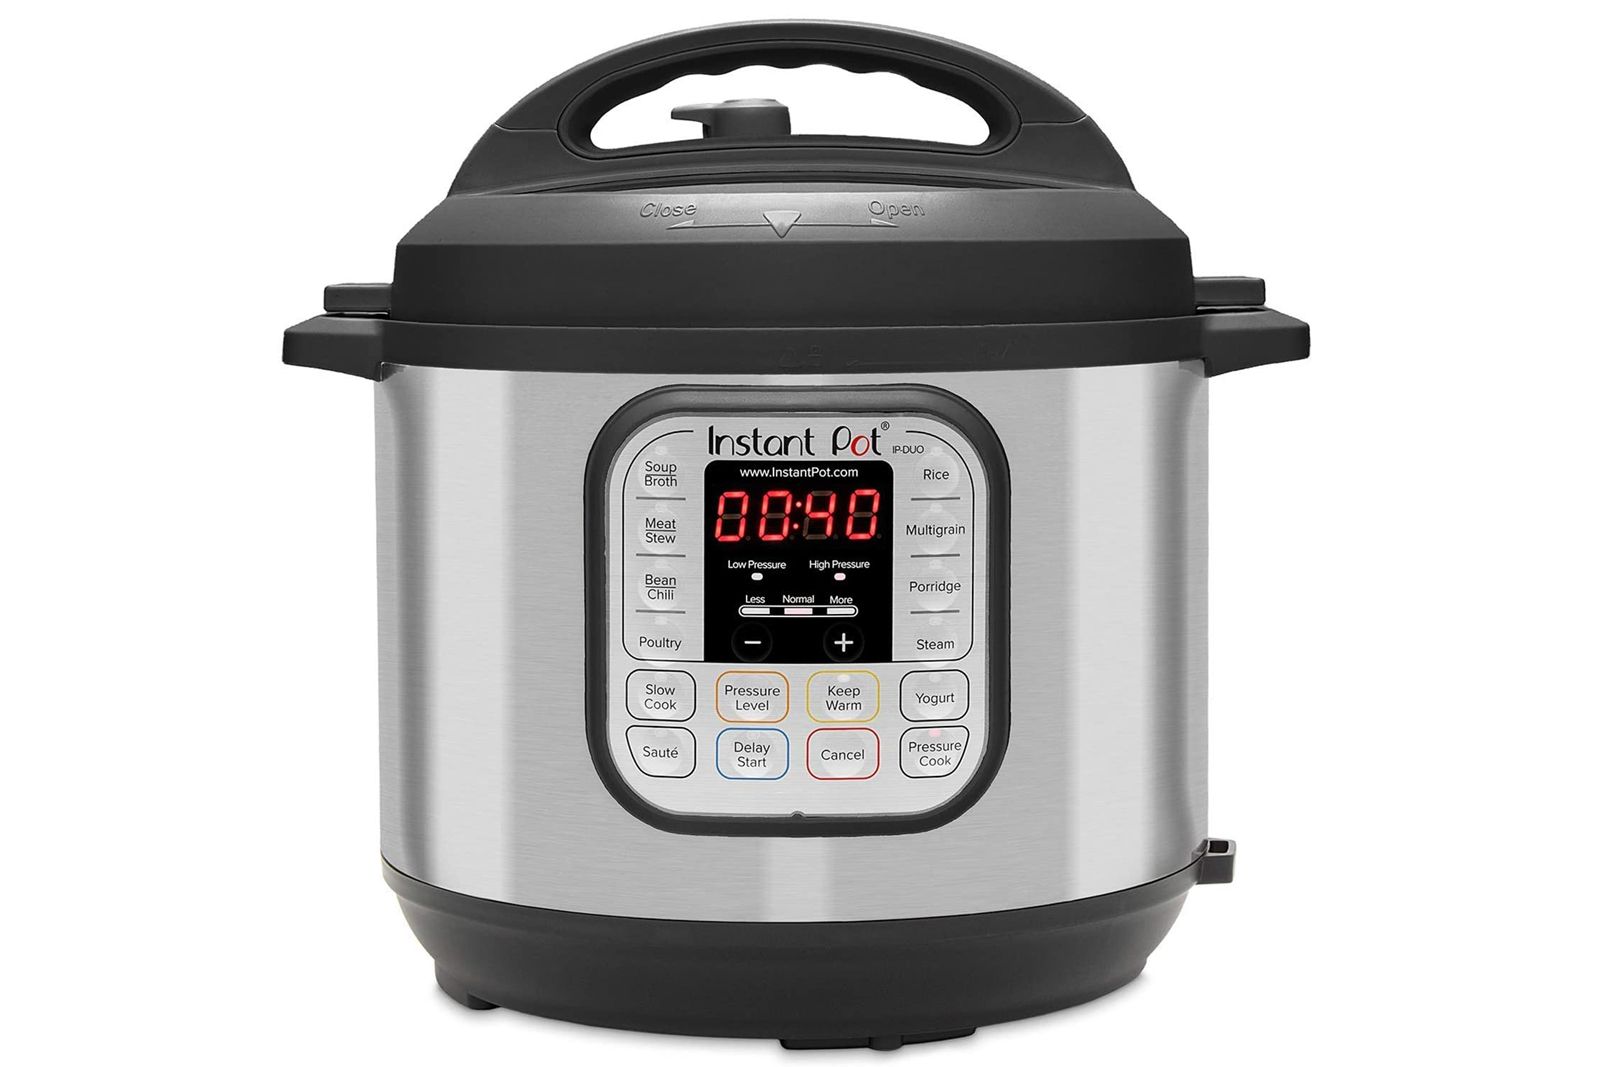 Early Prime Day Deal This Instant Pot Model Is 50 Off On Amazon Right Now photo 2